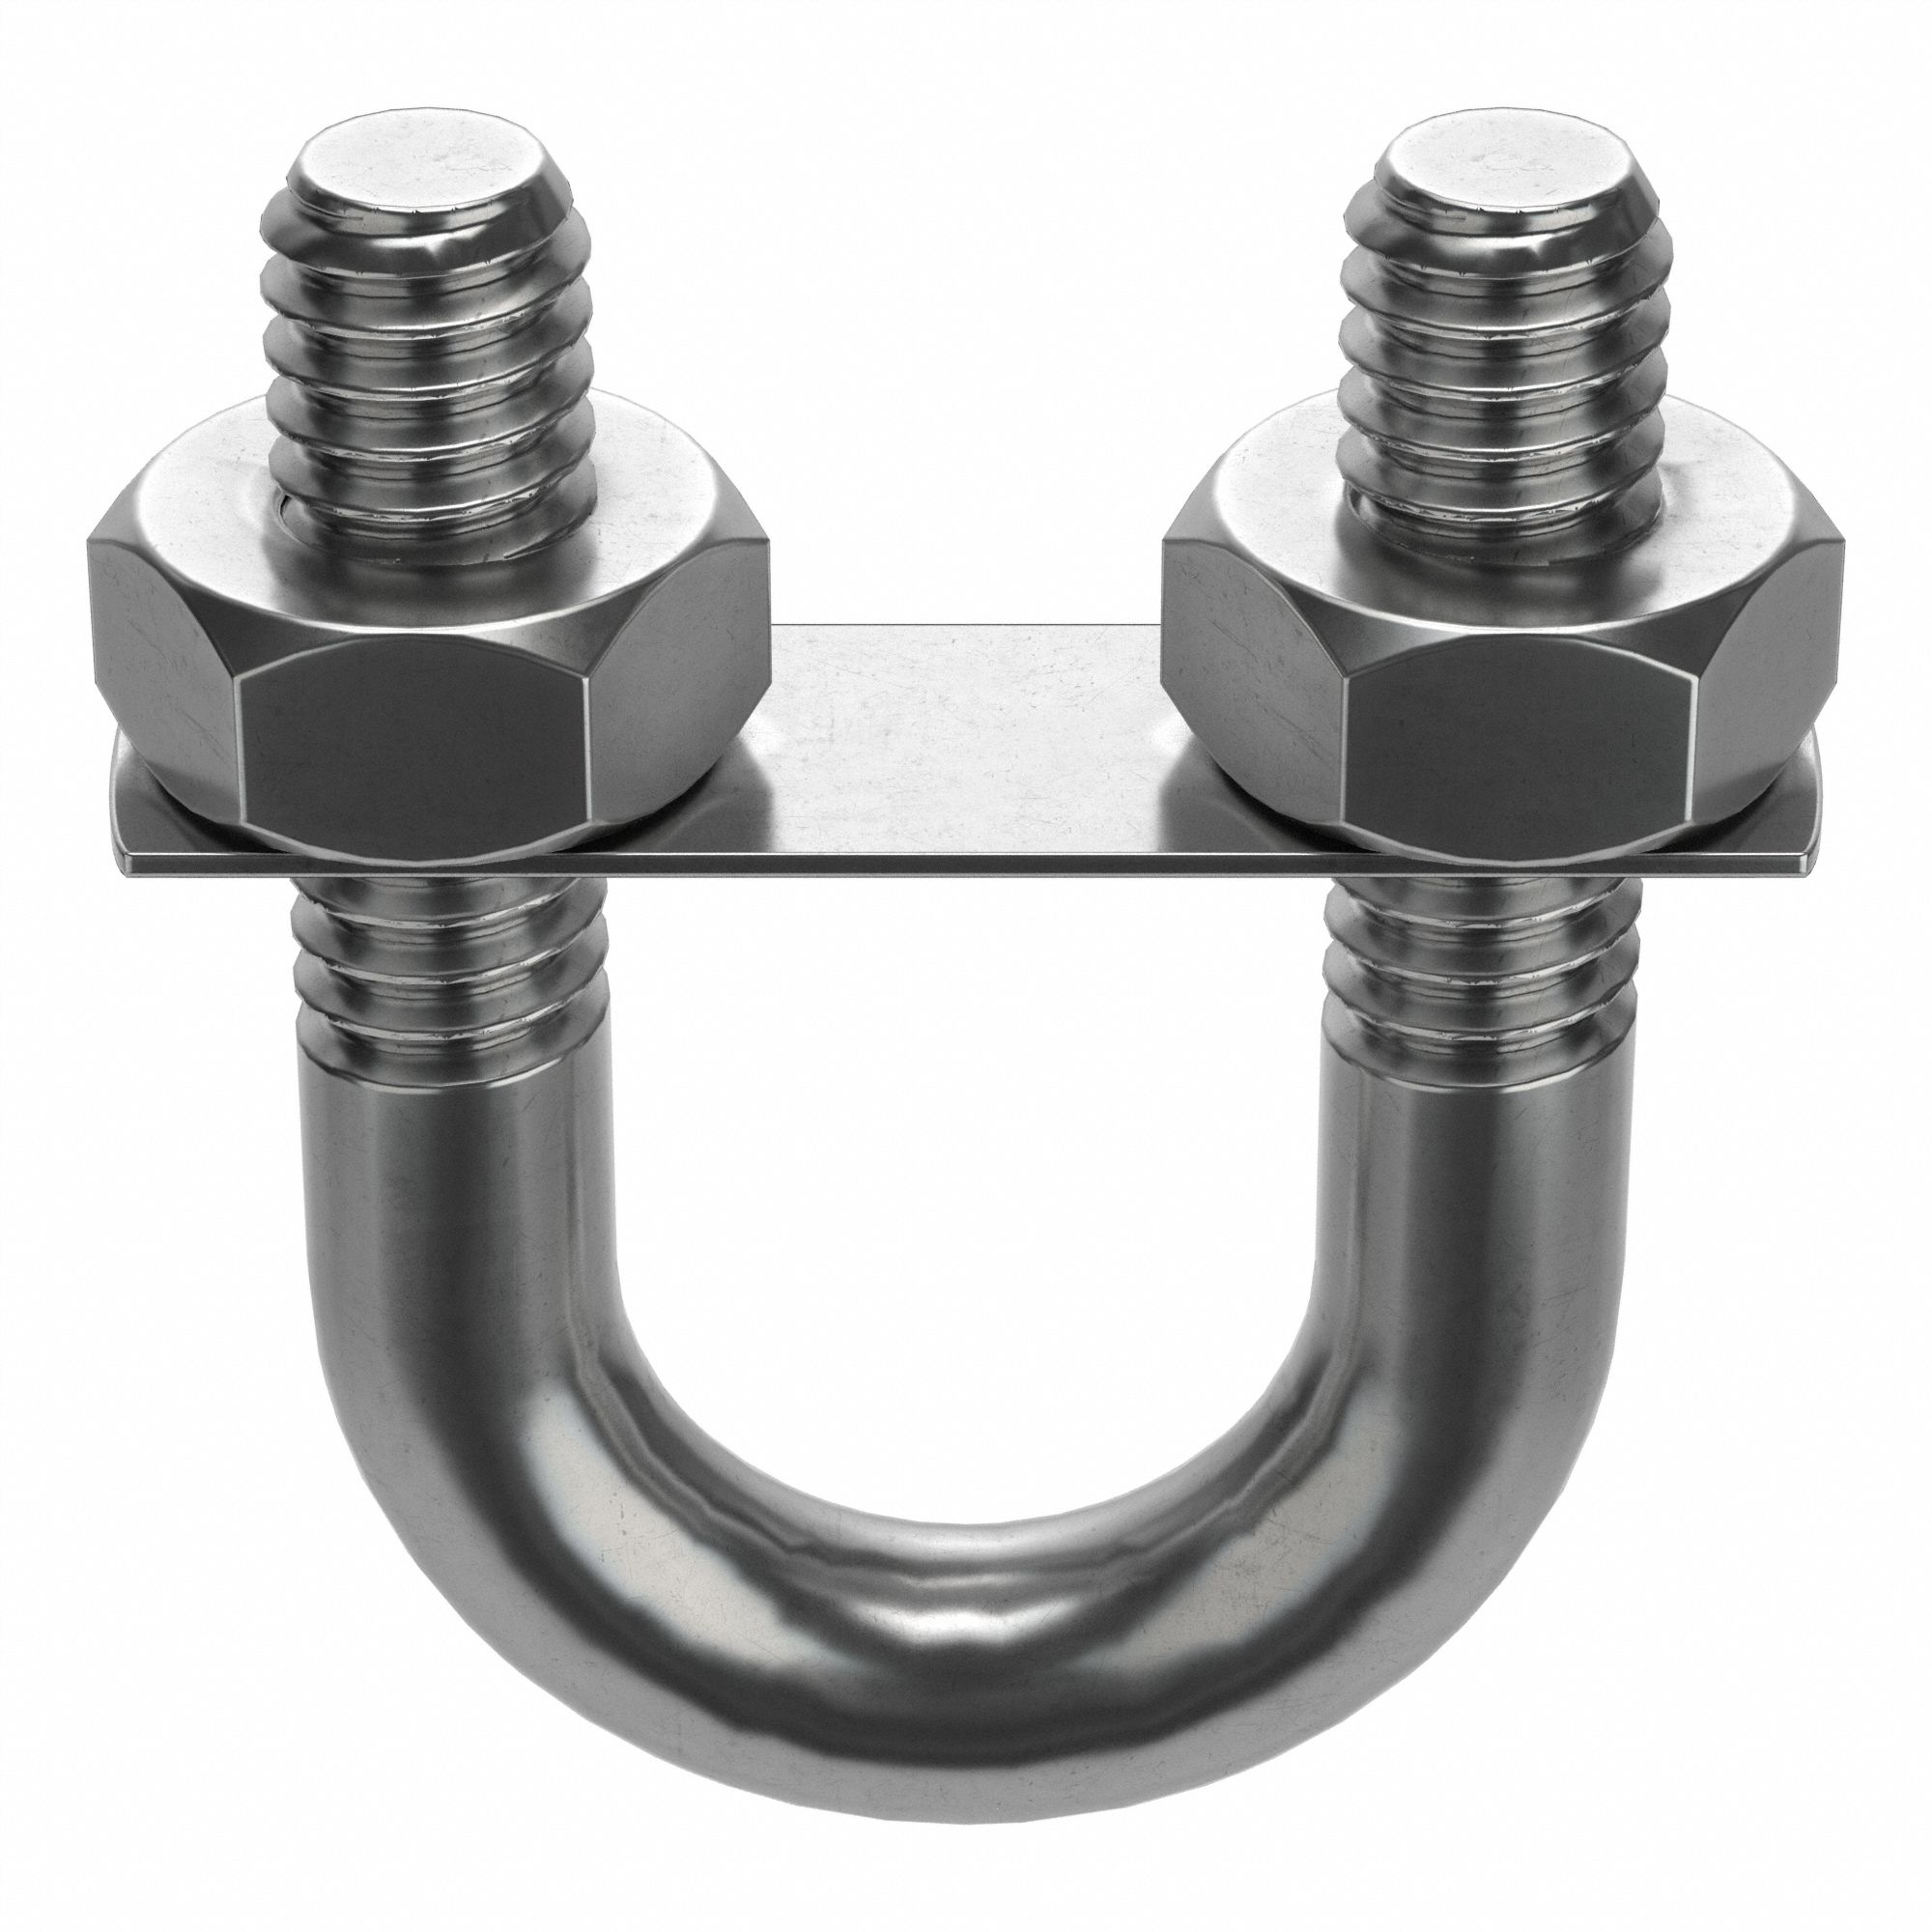 Standard U-Bolt with Mounting Plate: 304 Stainless Steel, Plain, 1/4